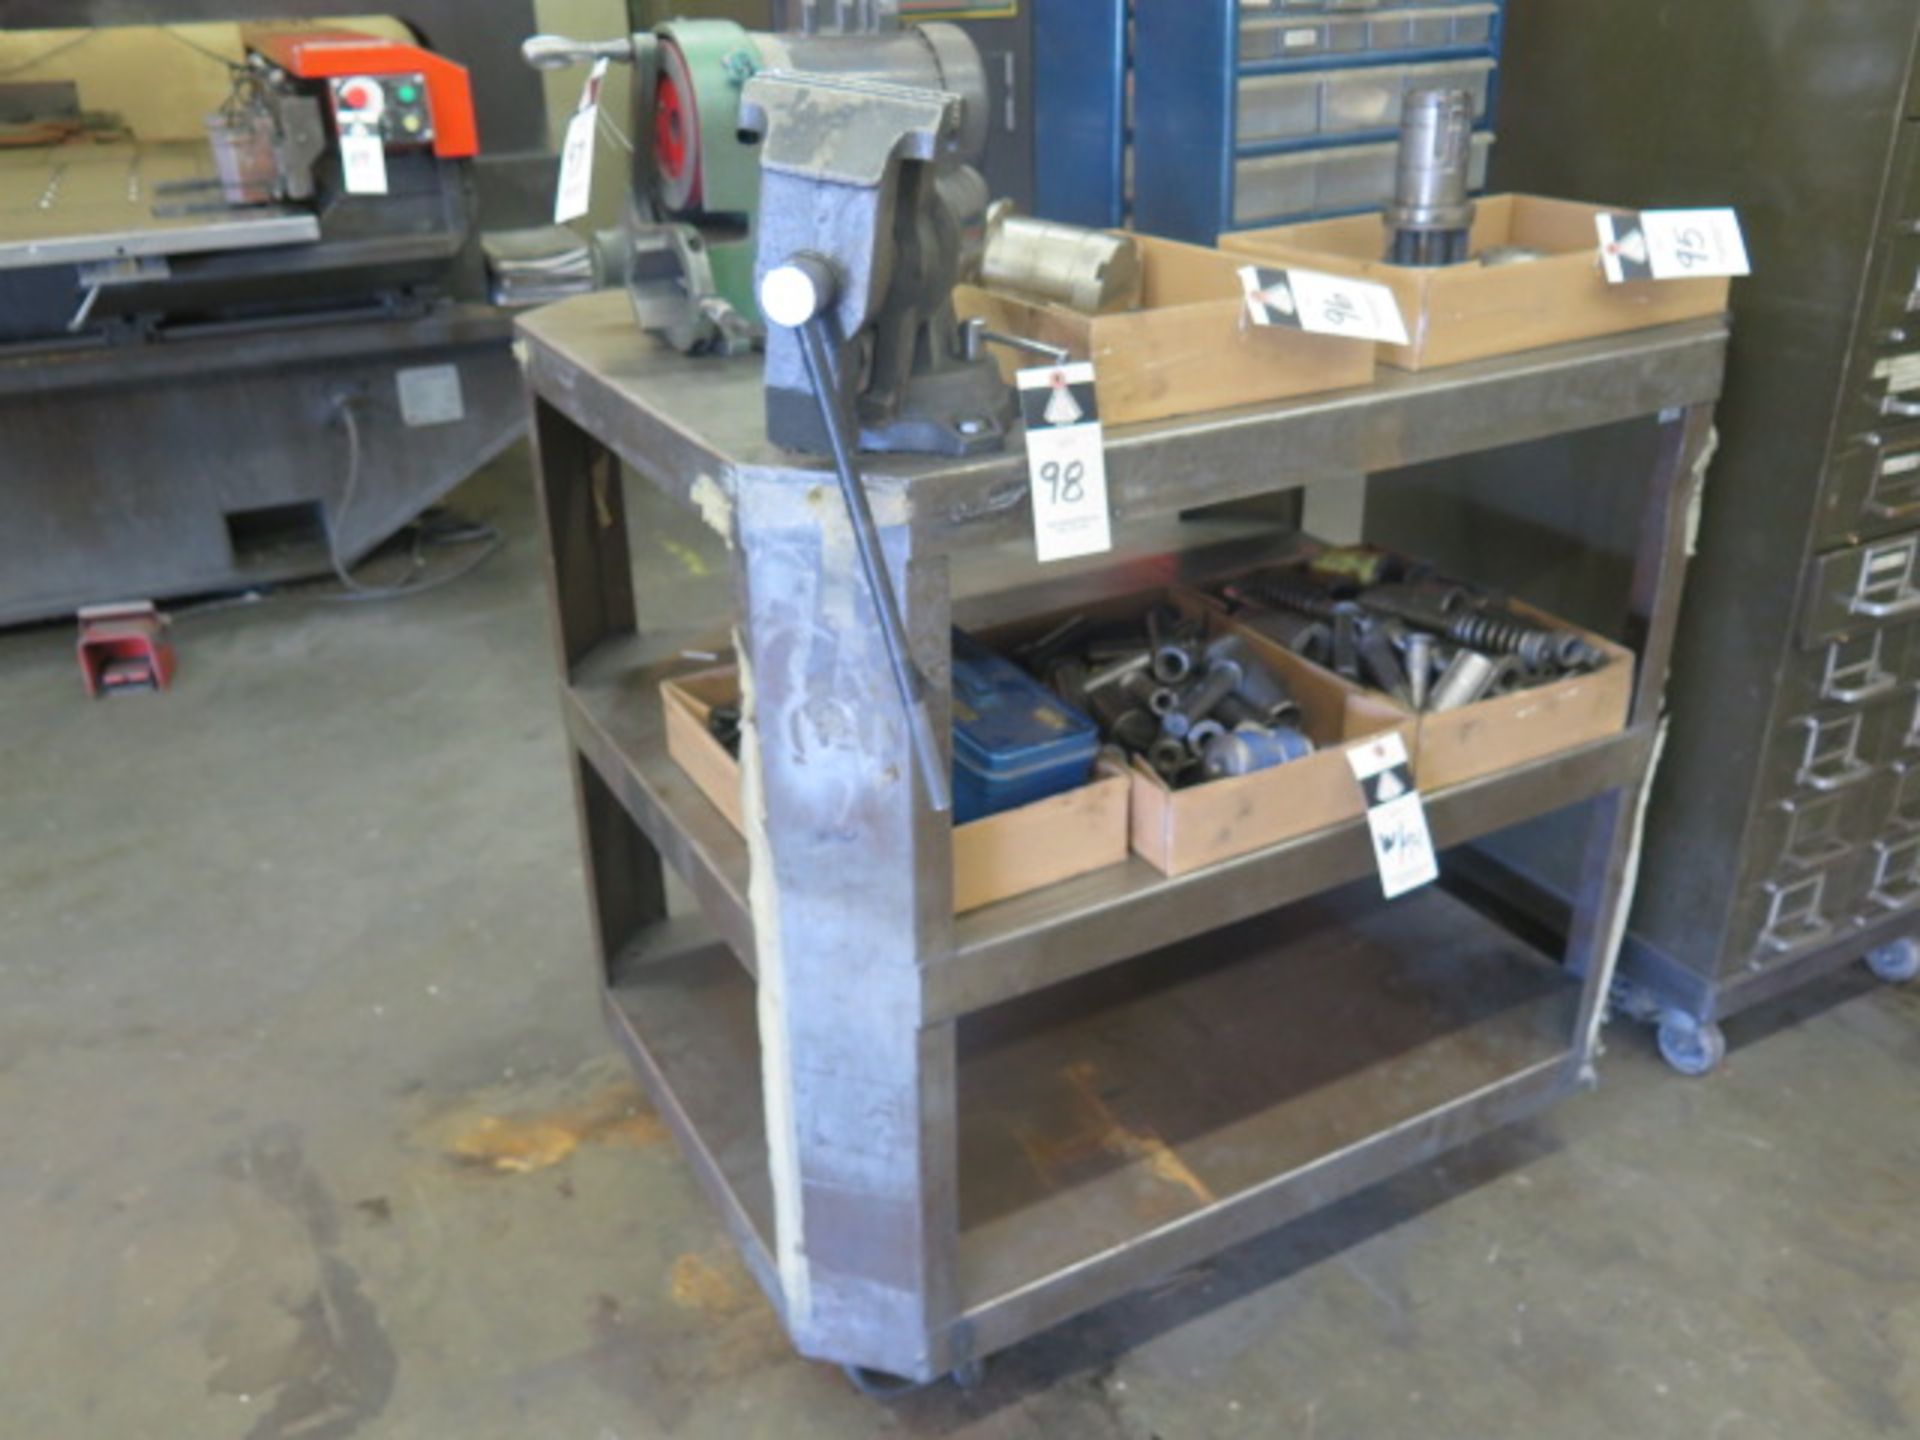 Shop Cart and Bench Vise